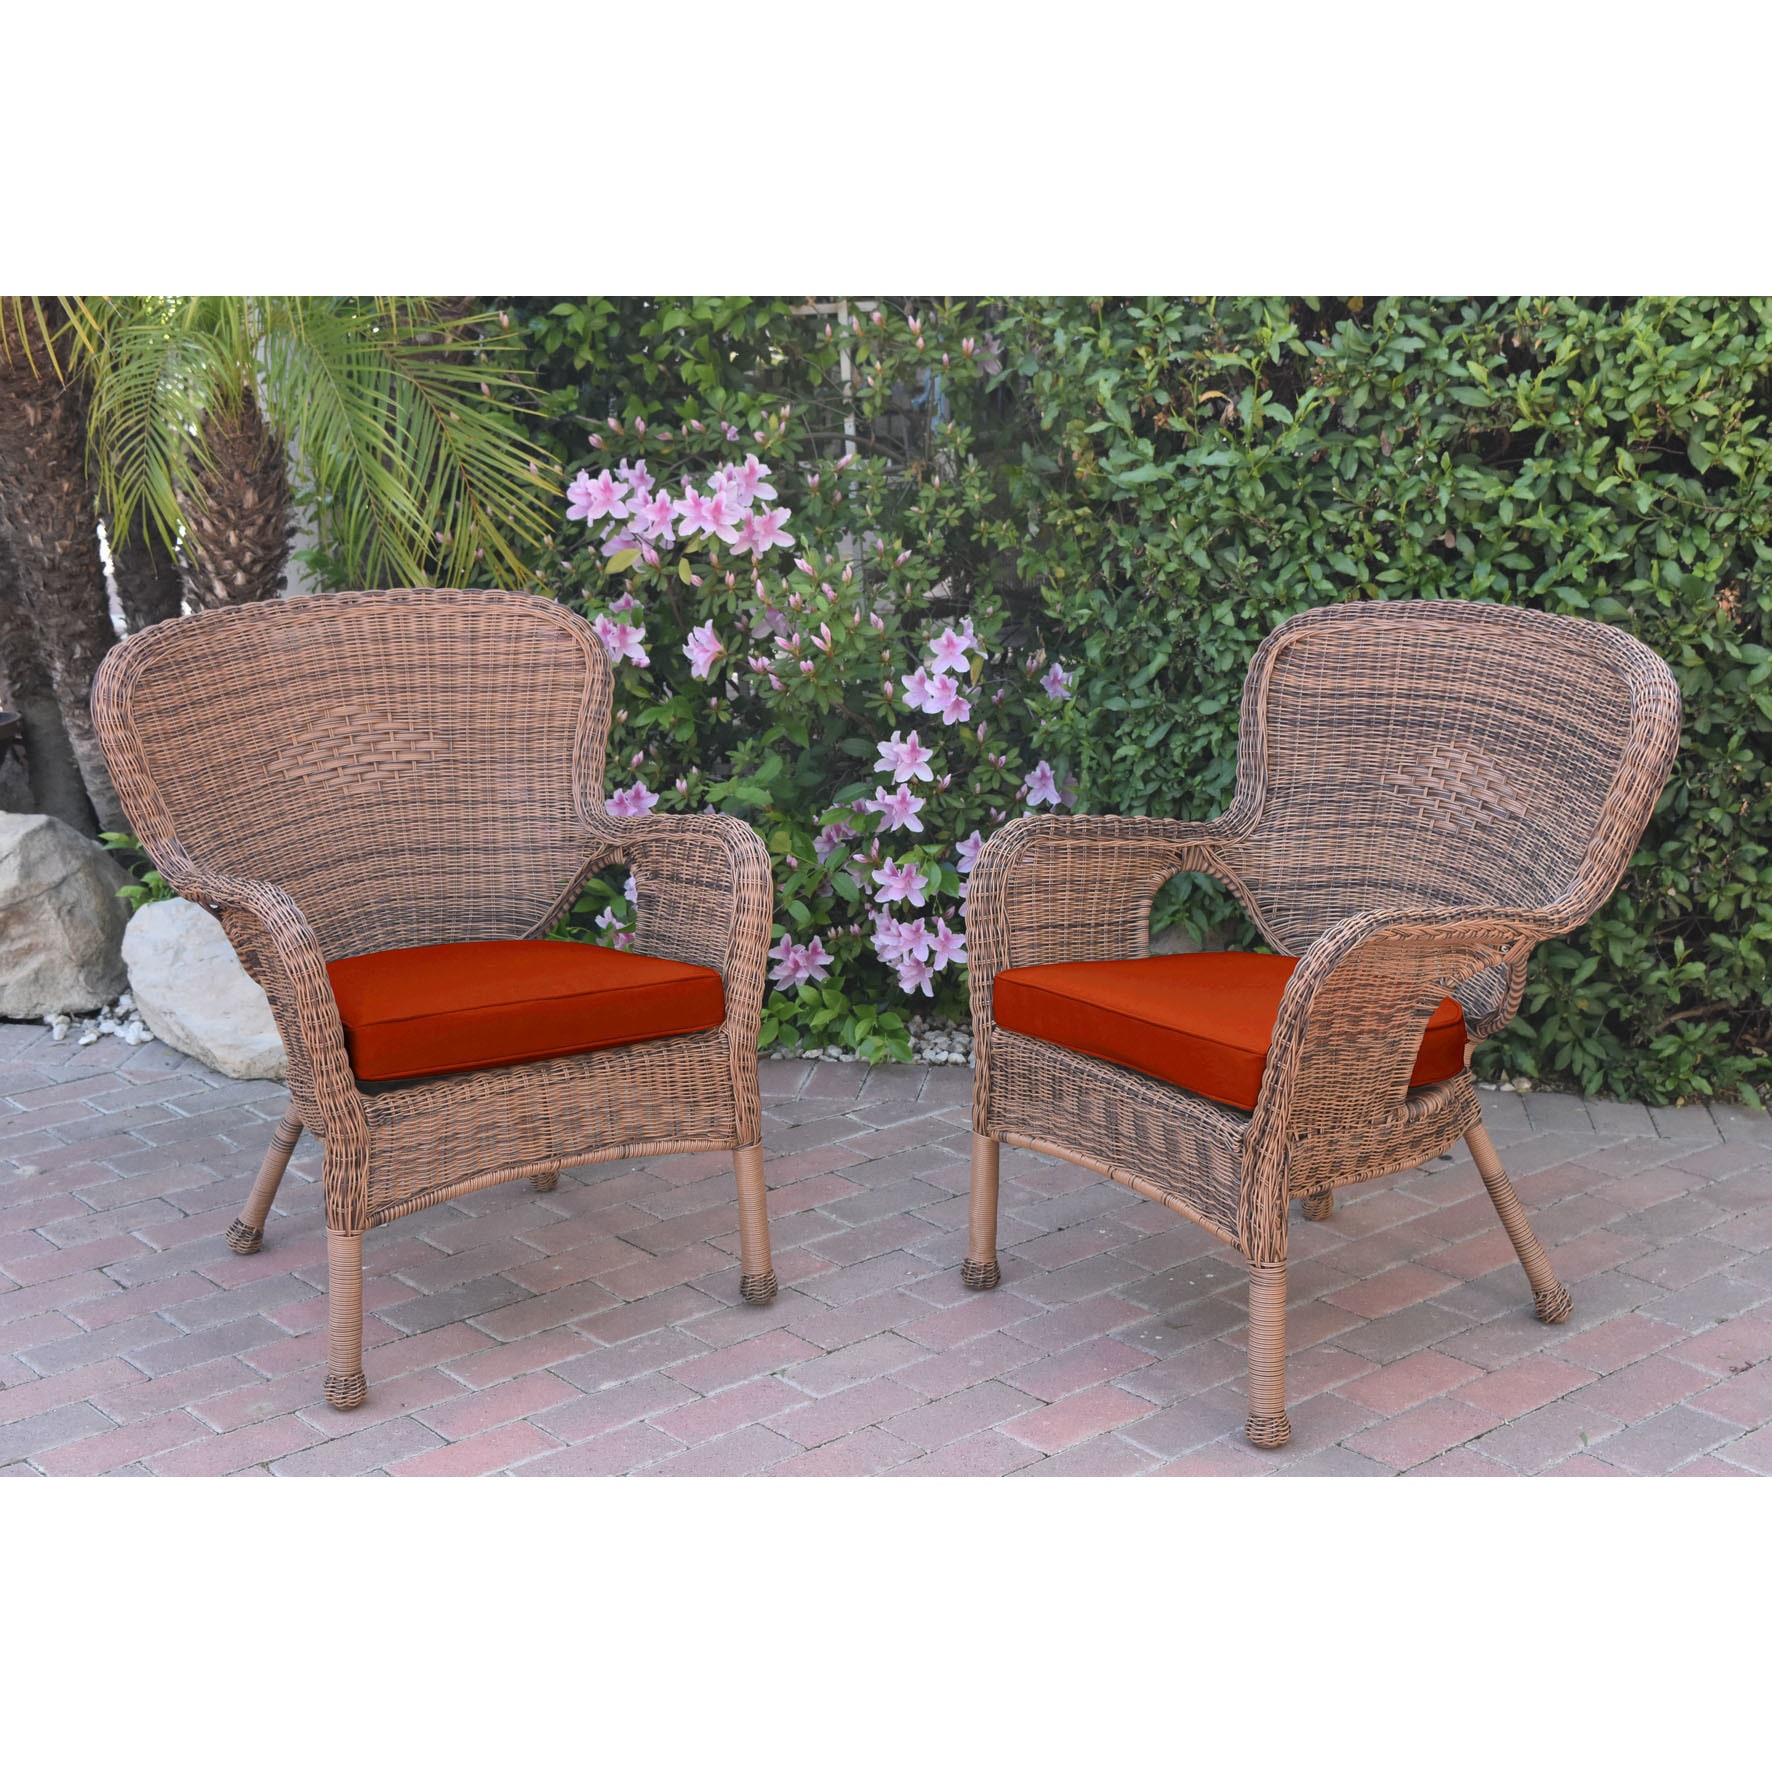 Jeco Windsor Honey Resin Wicker Chairs With Cushions (set Of 2)